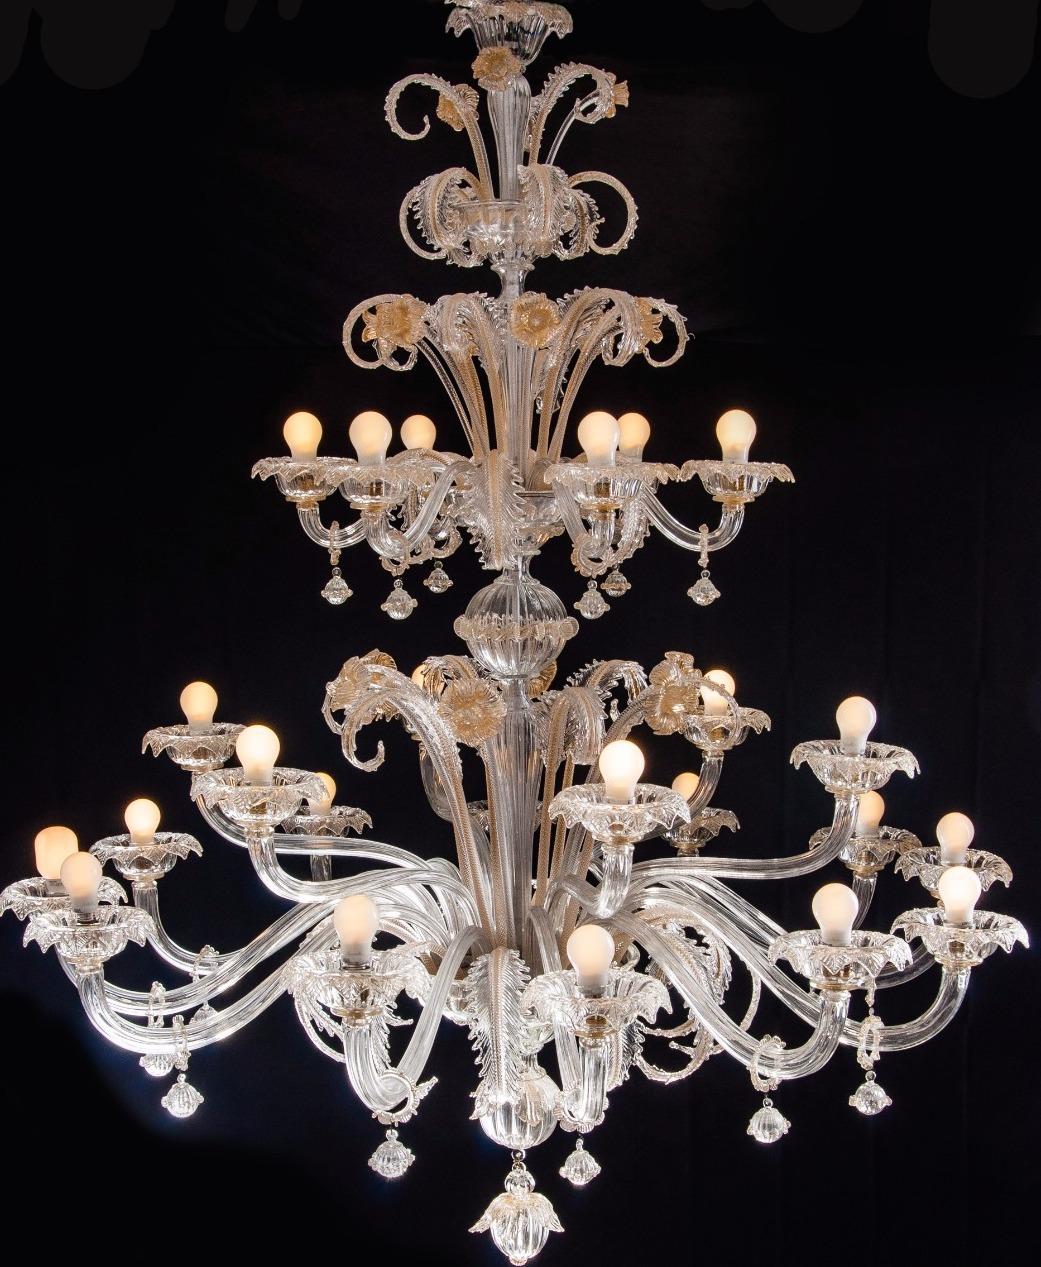 Spectacular pair of Murano chandeliers. The arms 24 are arranged on three floors. The glasses are embellished with gold inclusions.
We can wire the chandelier with candle light holders. 
Provenance from an important Roman palace.
 
This light